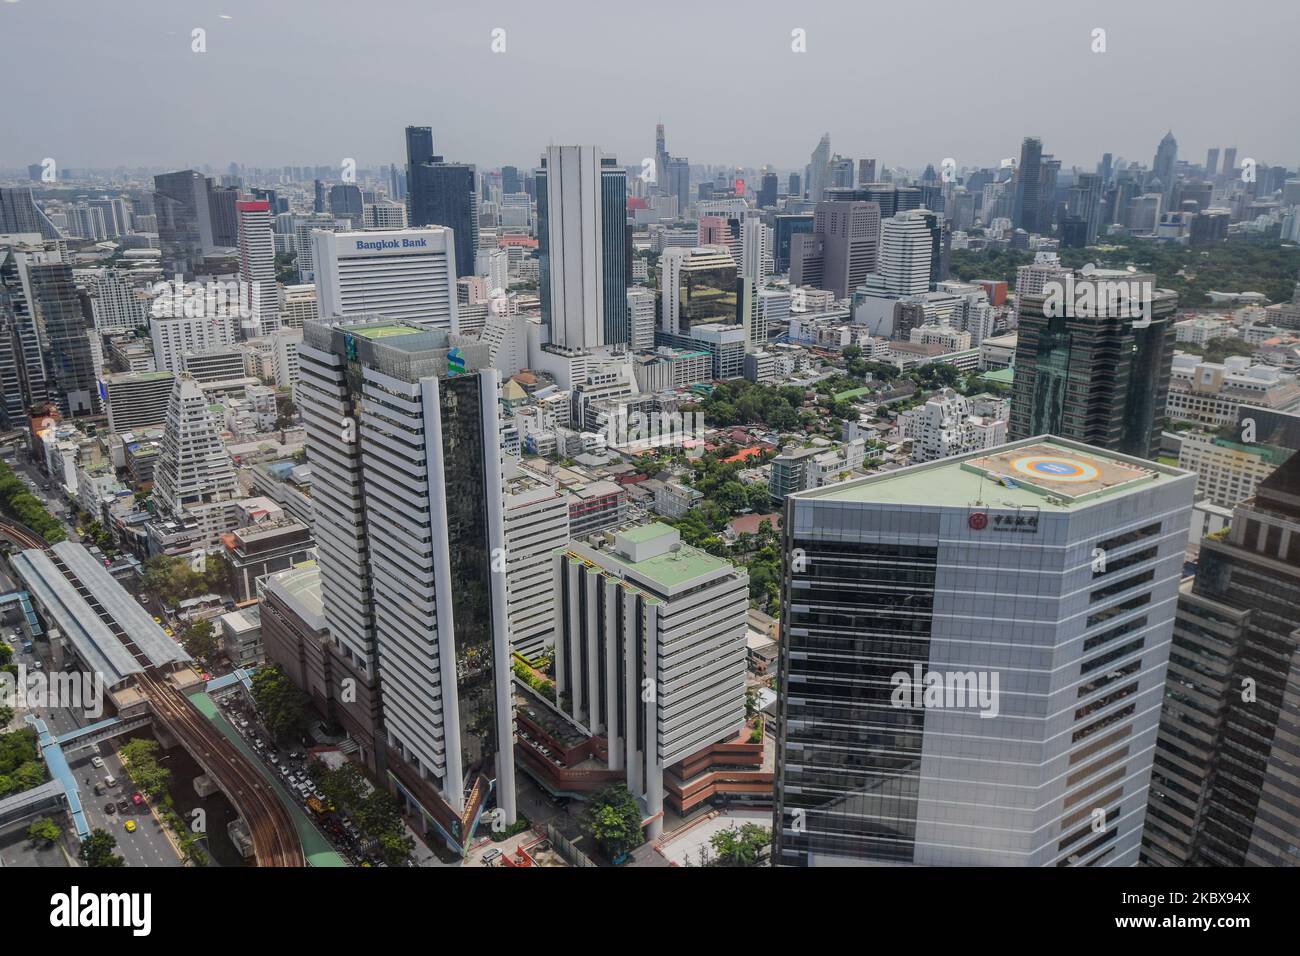 A general view of high-rise buildings in Bangkok city on August 18, 2020 in Bangkok, Thailand. (Photo by Vachira Vachira/NurPhoto) Stock Photo